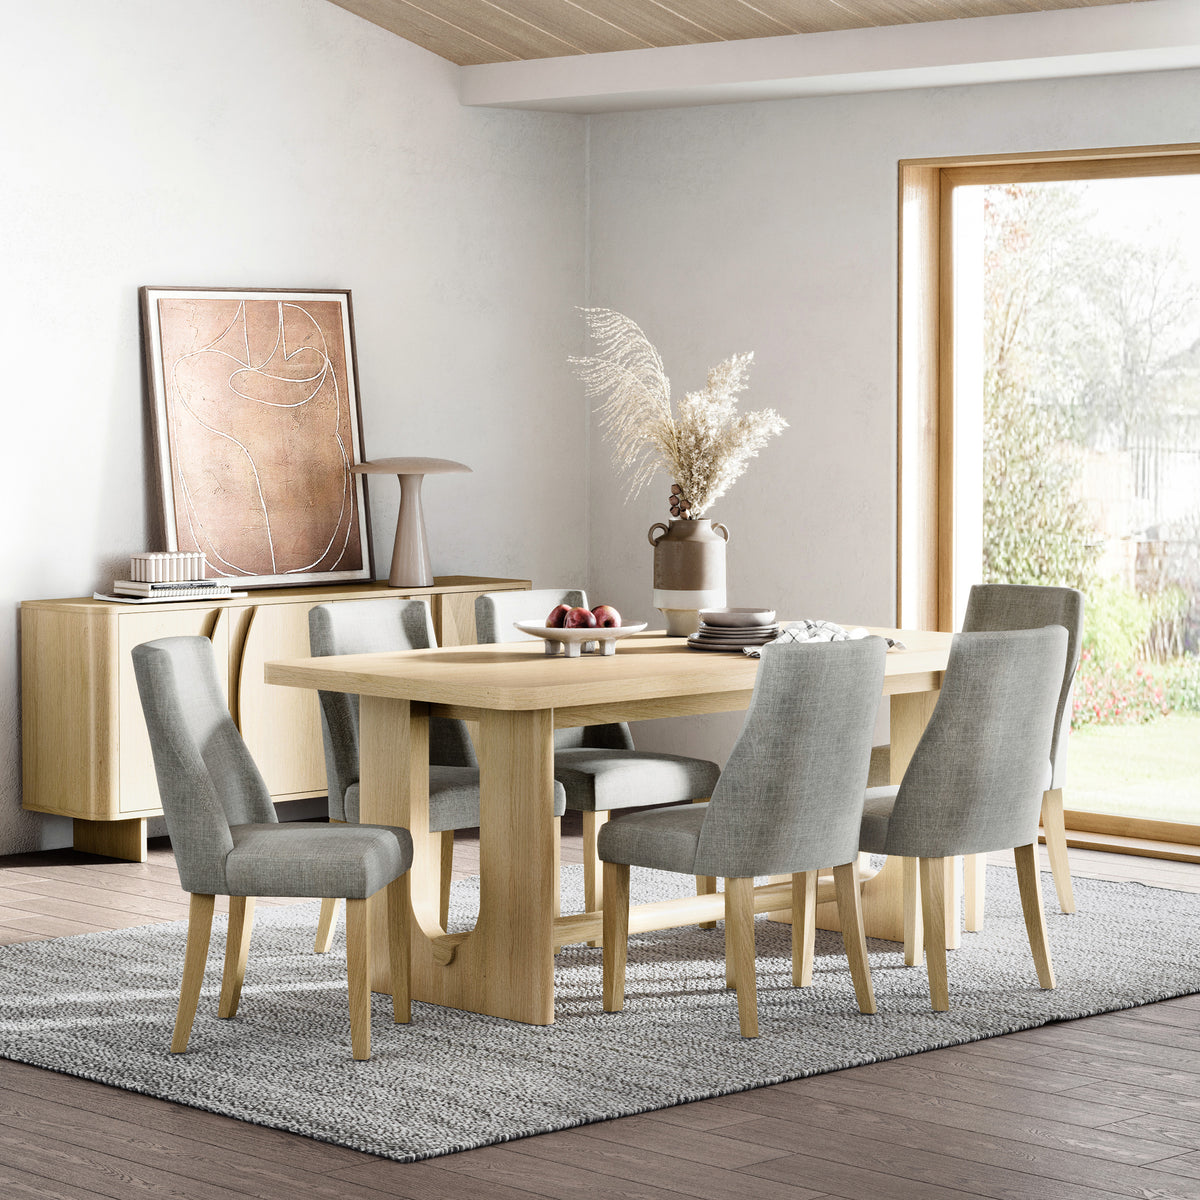 Whitstone Oak Large Extending Dining Table from Roseland Furniture